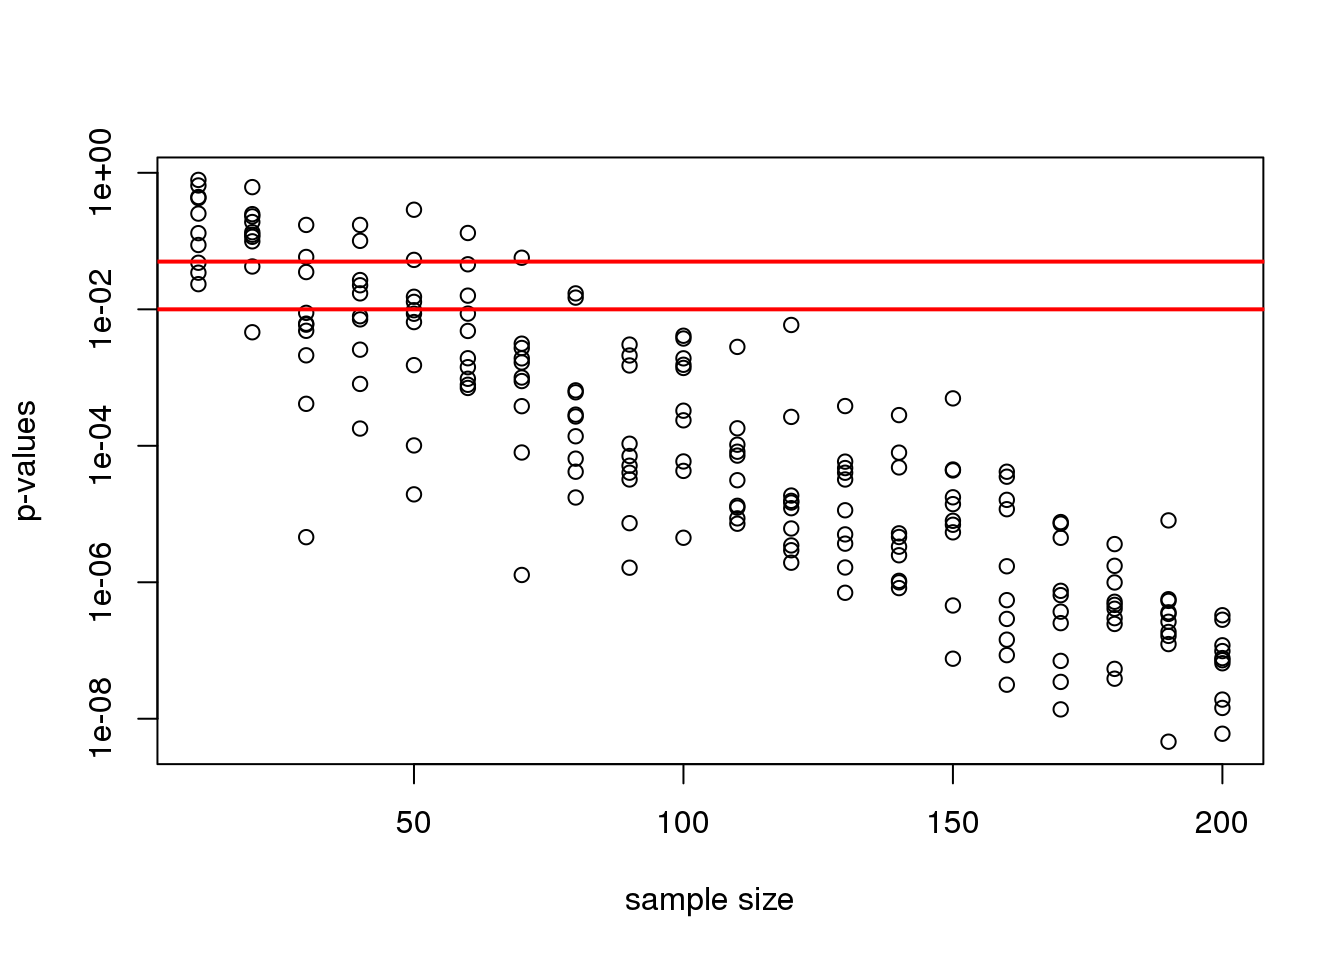 p-values from random samples at varying sample size. The actual value of the p-values decreases as we increase sample size whenever the alternative hypothesis is true.